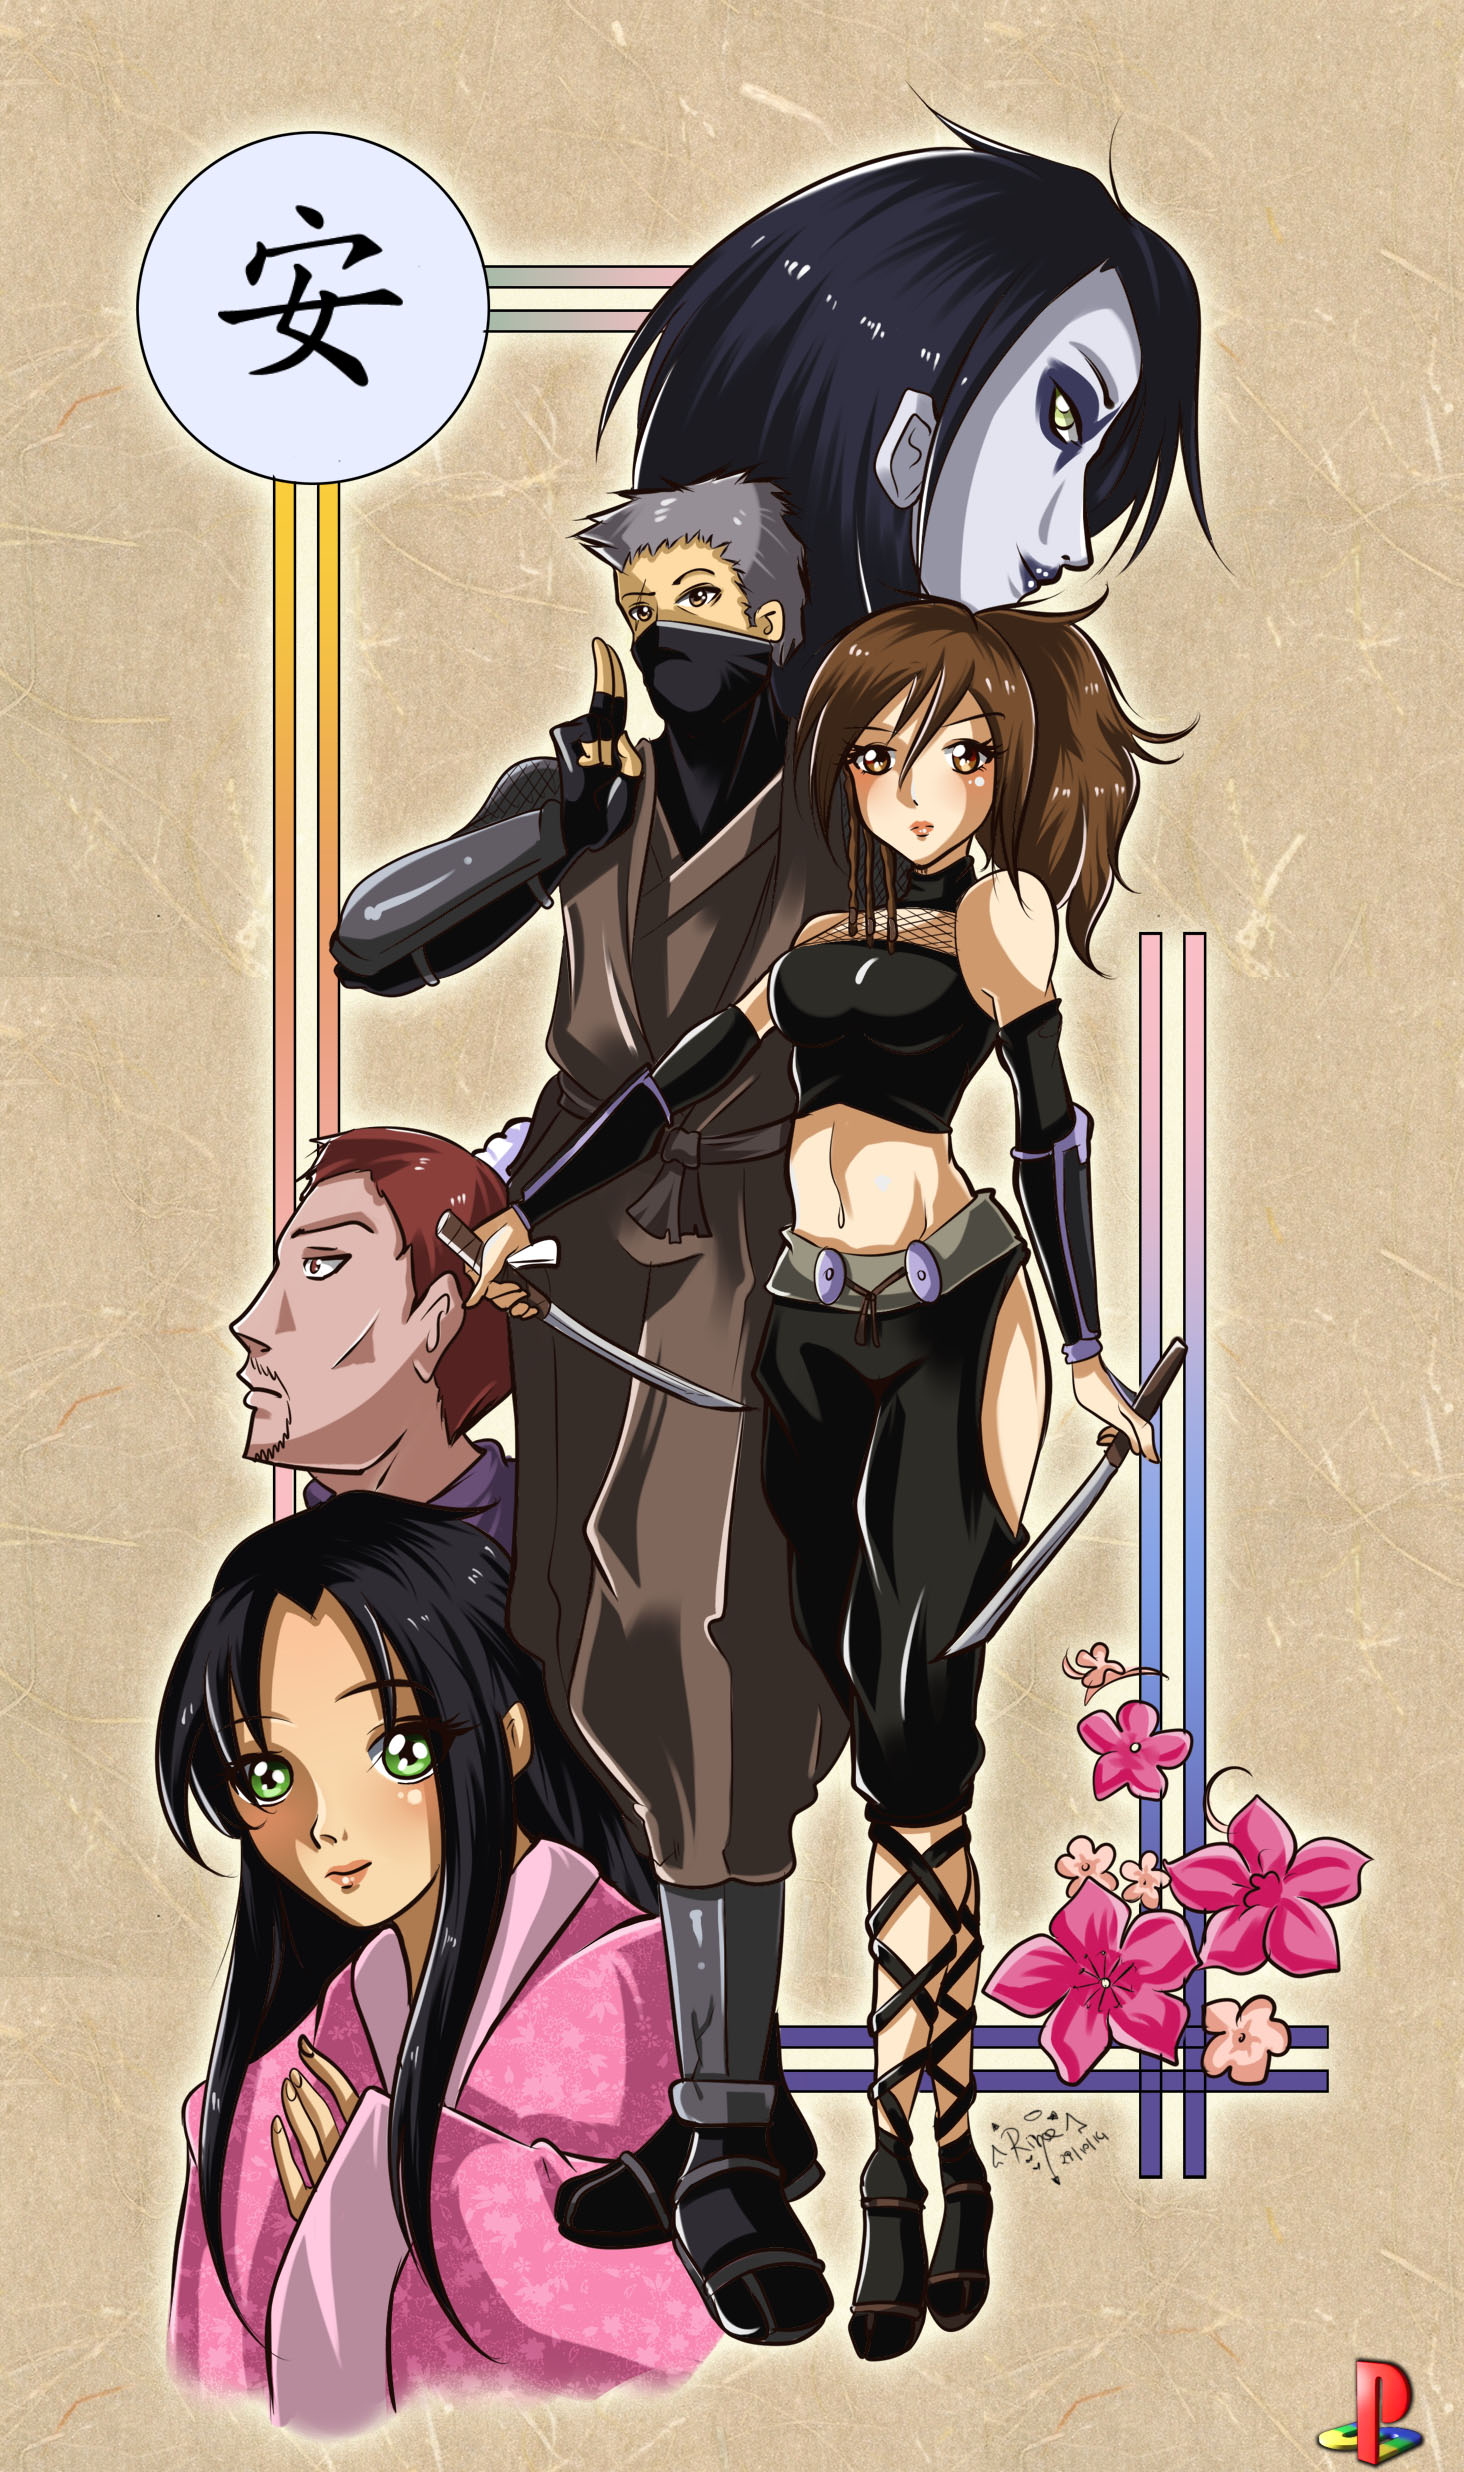 The Tenchu Main Characters Playstation Anniversary Tribute on Game-Art-HQ